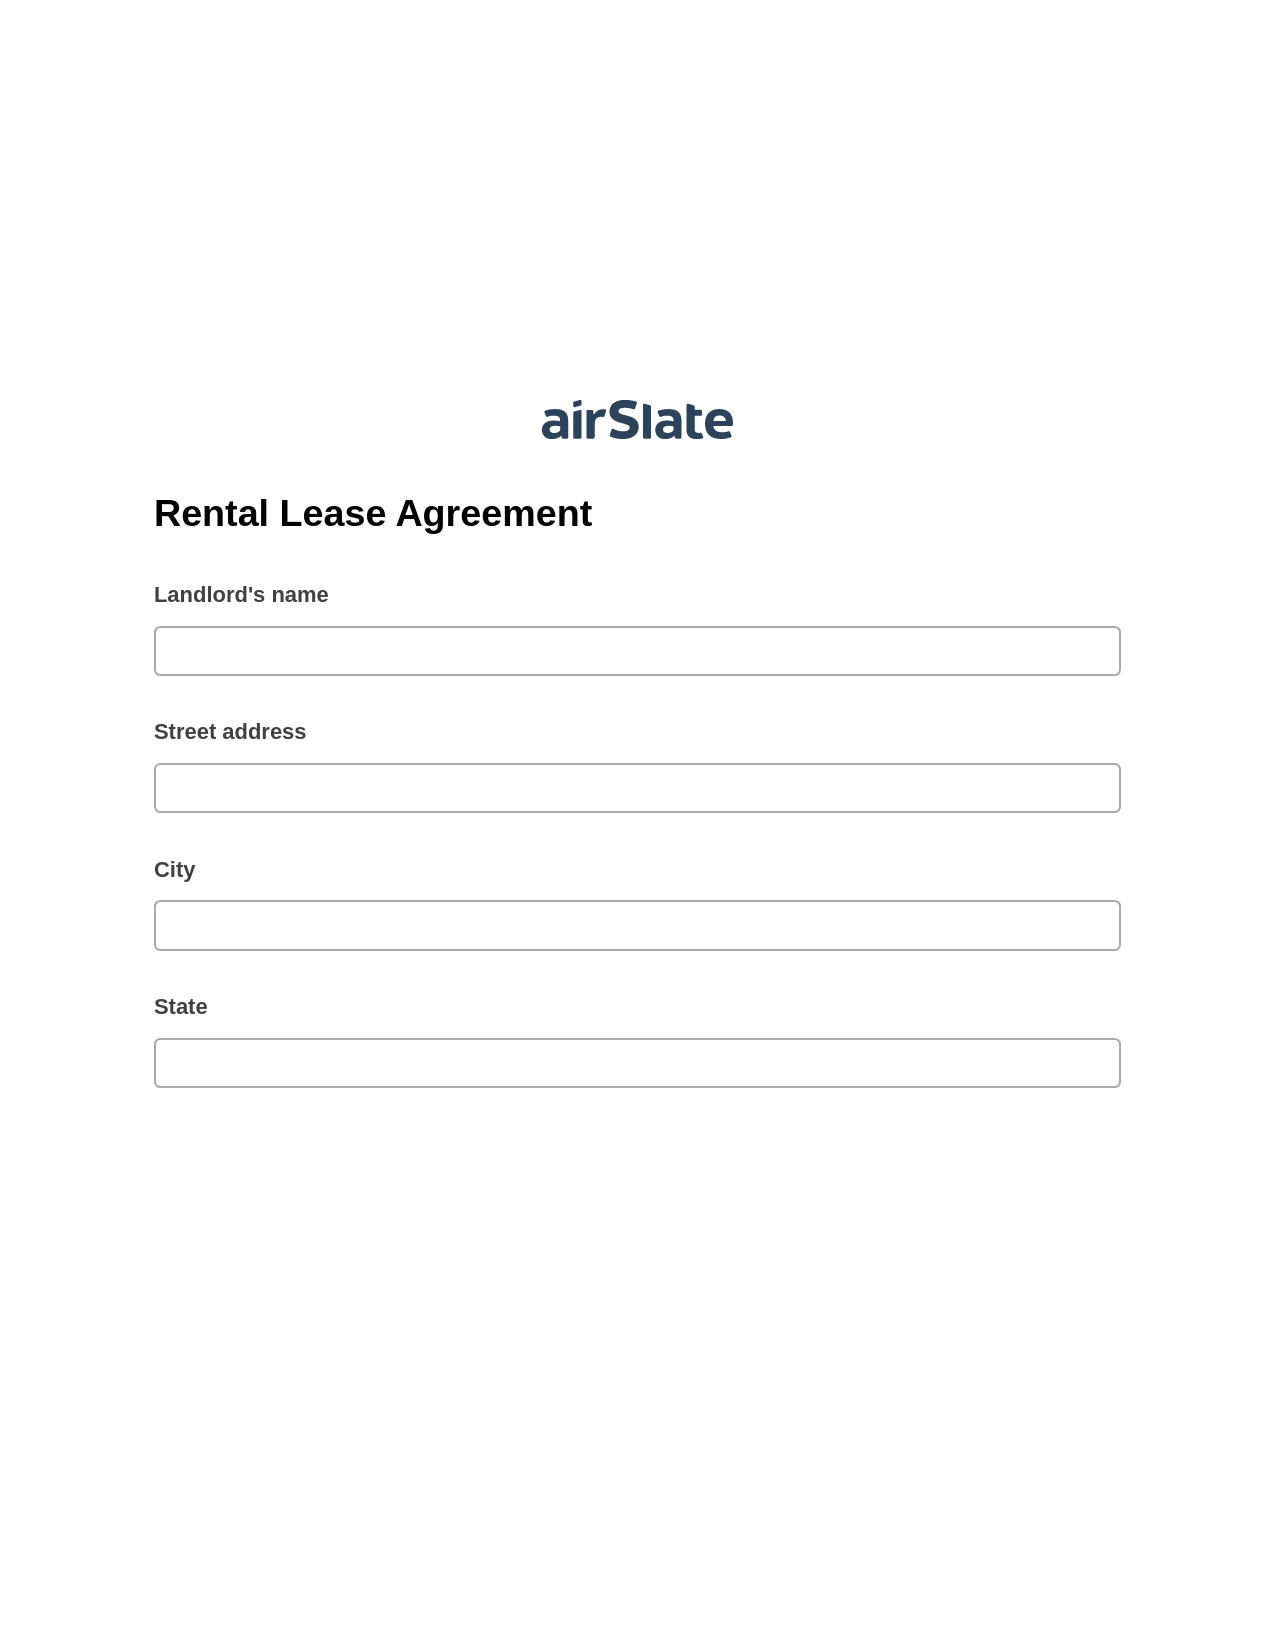 Multirole Rental Lease Agreement Pre-fill Dropdown from Airtable, Invoke Salesforce Process Bot, Export to NetSuite Record Bot